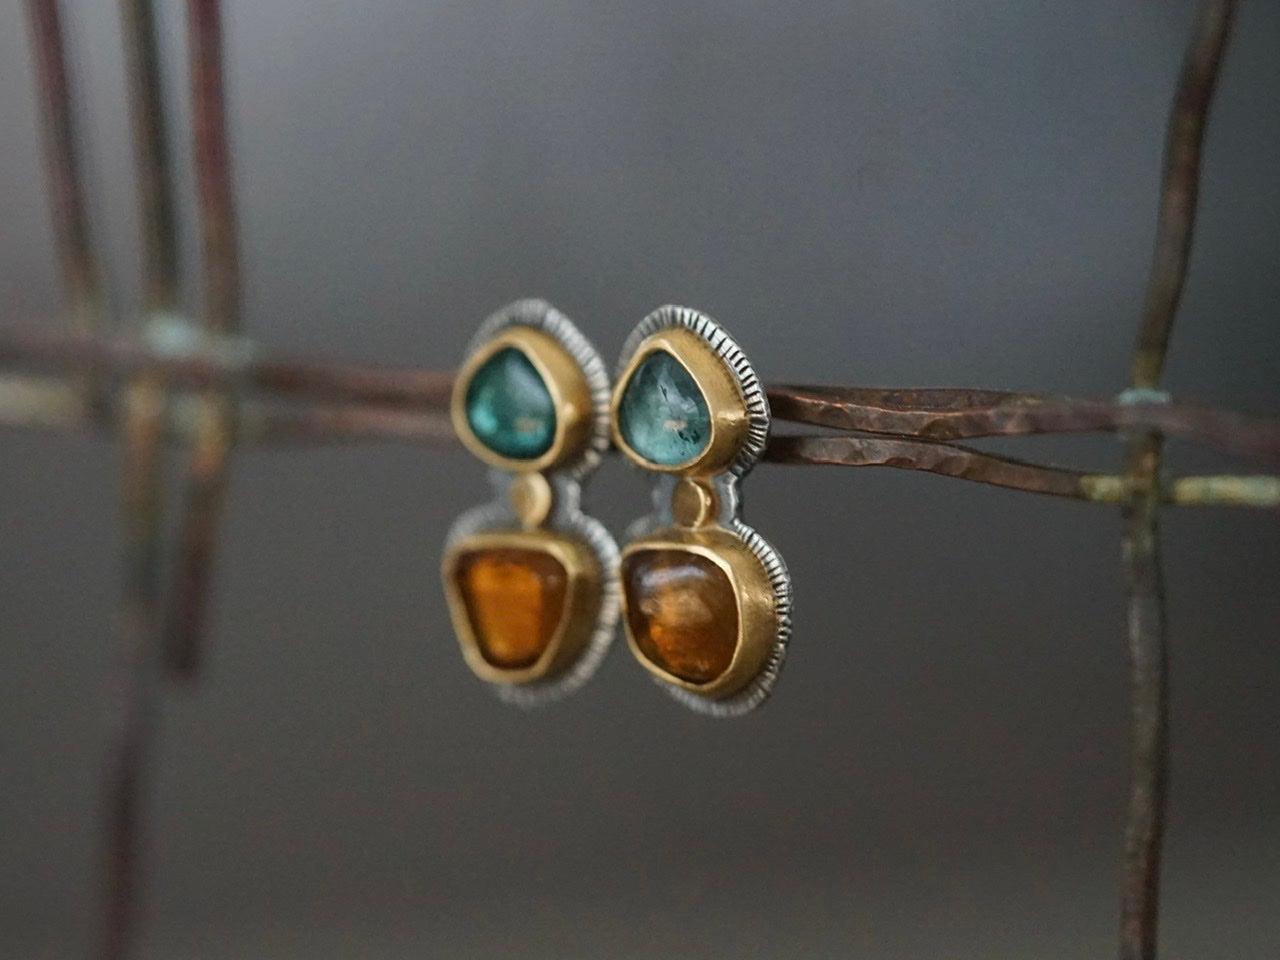 Teal and ochre tourmaline in 22k gold post earrings